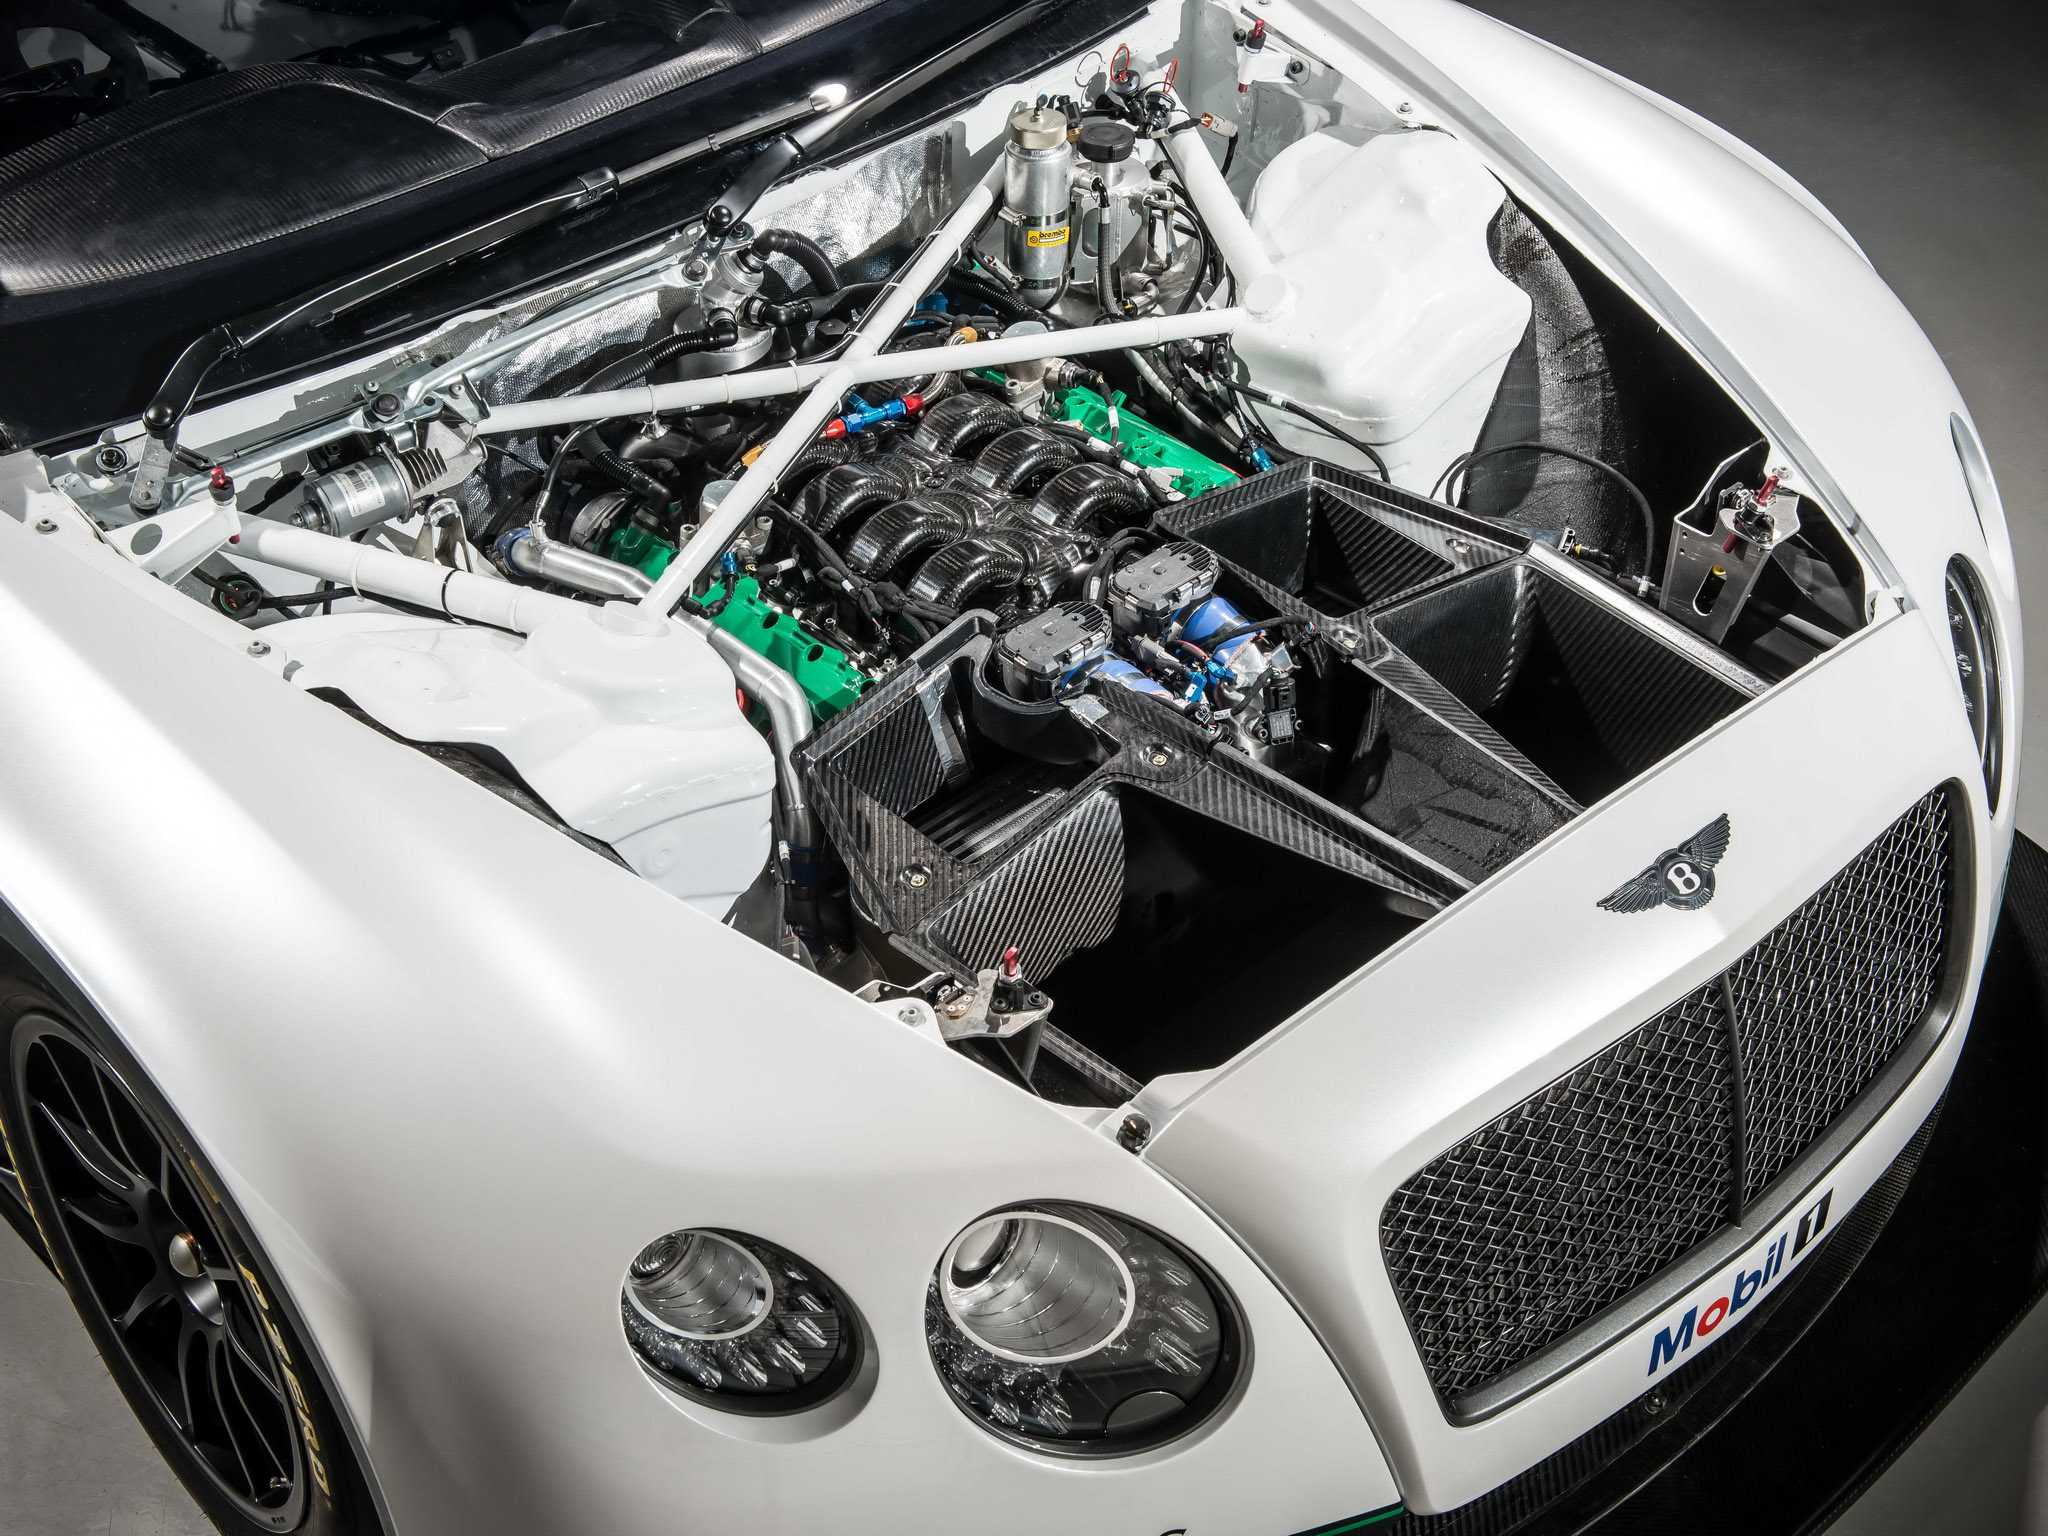 2013, Bentley, Continental, Gt3, Supercar, Supercars, Race, Racing, Luxury, Engine, Engines Wallpaper